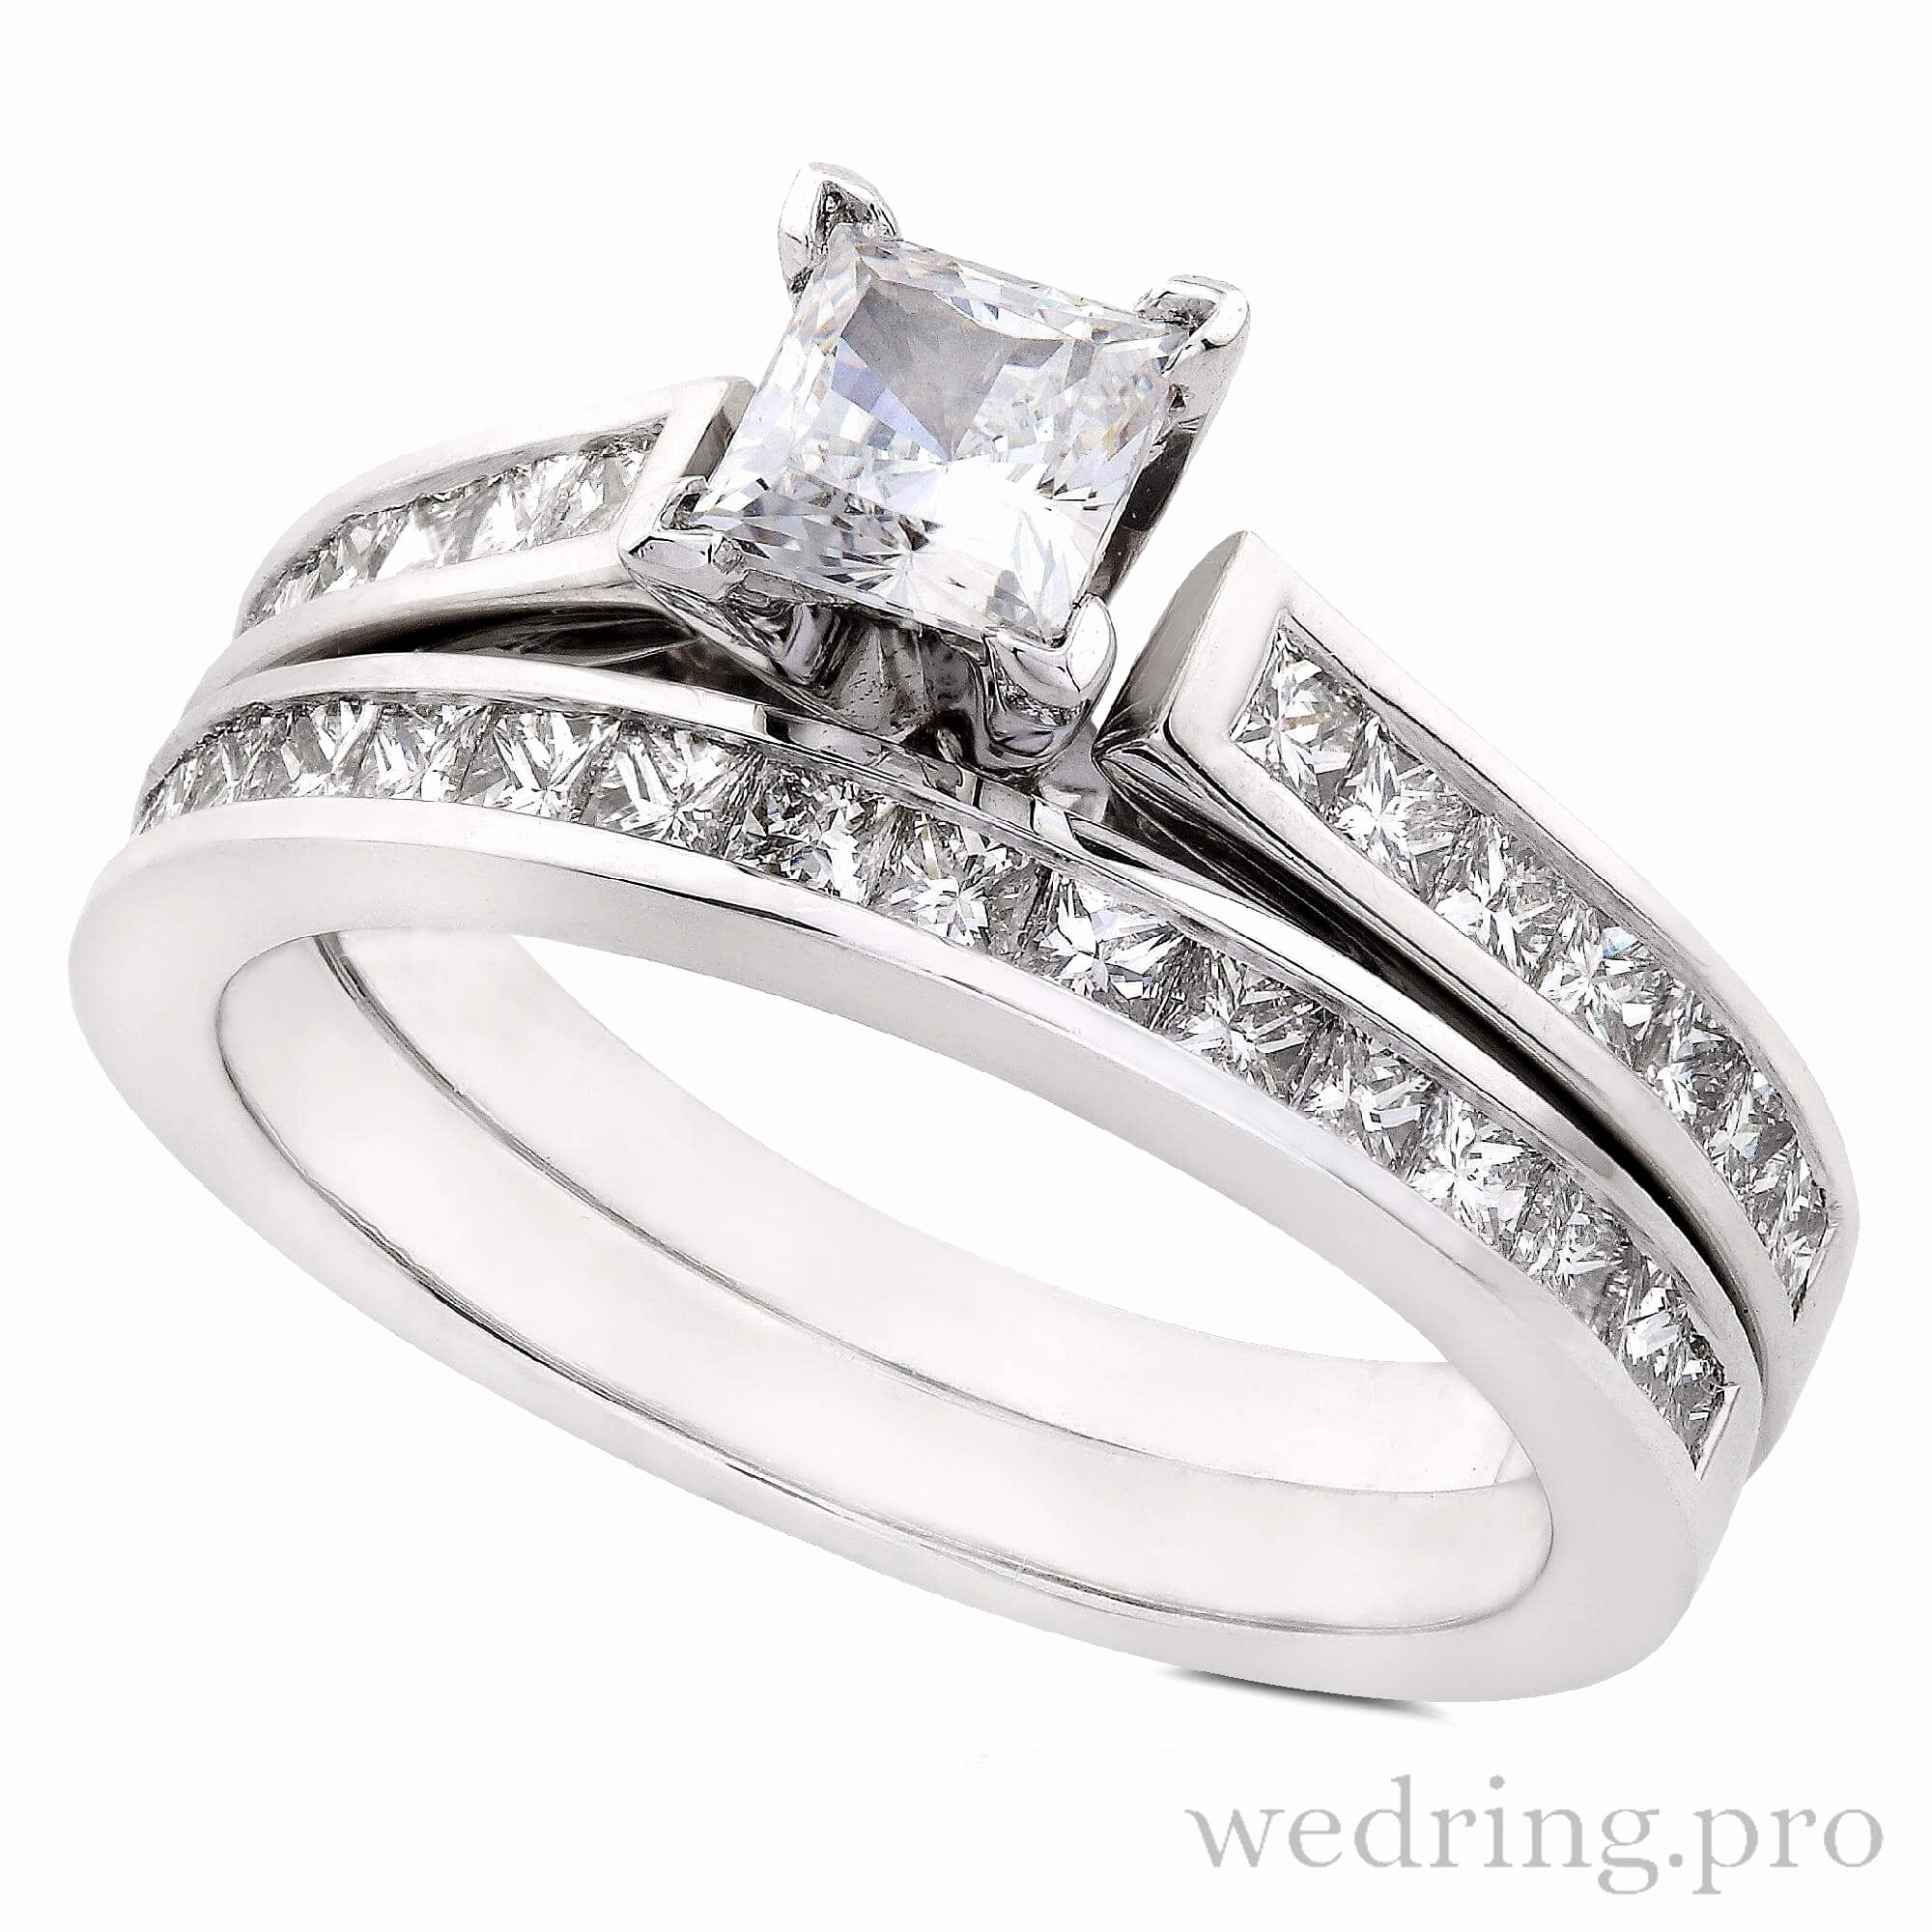 Jcpenney Wedding Band Sets
 Jcpenney Wedding Rings Wedding World